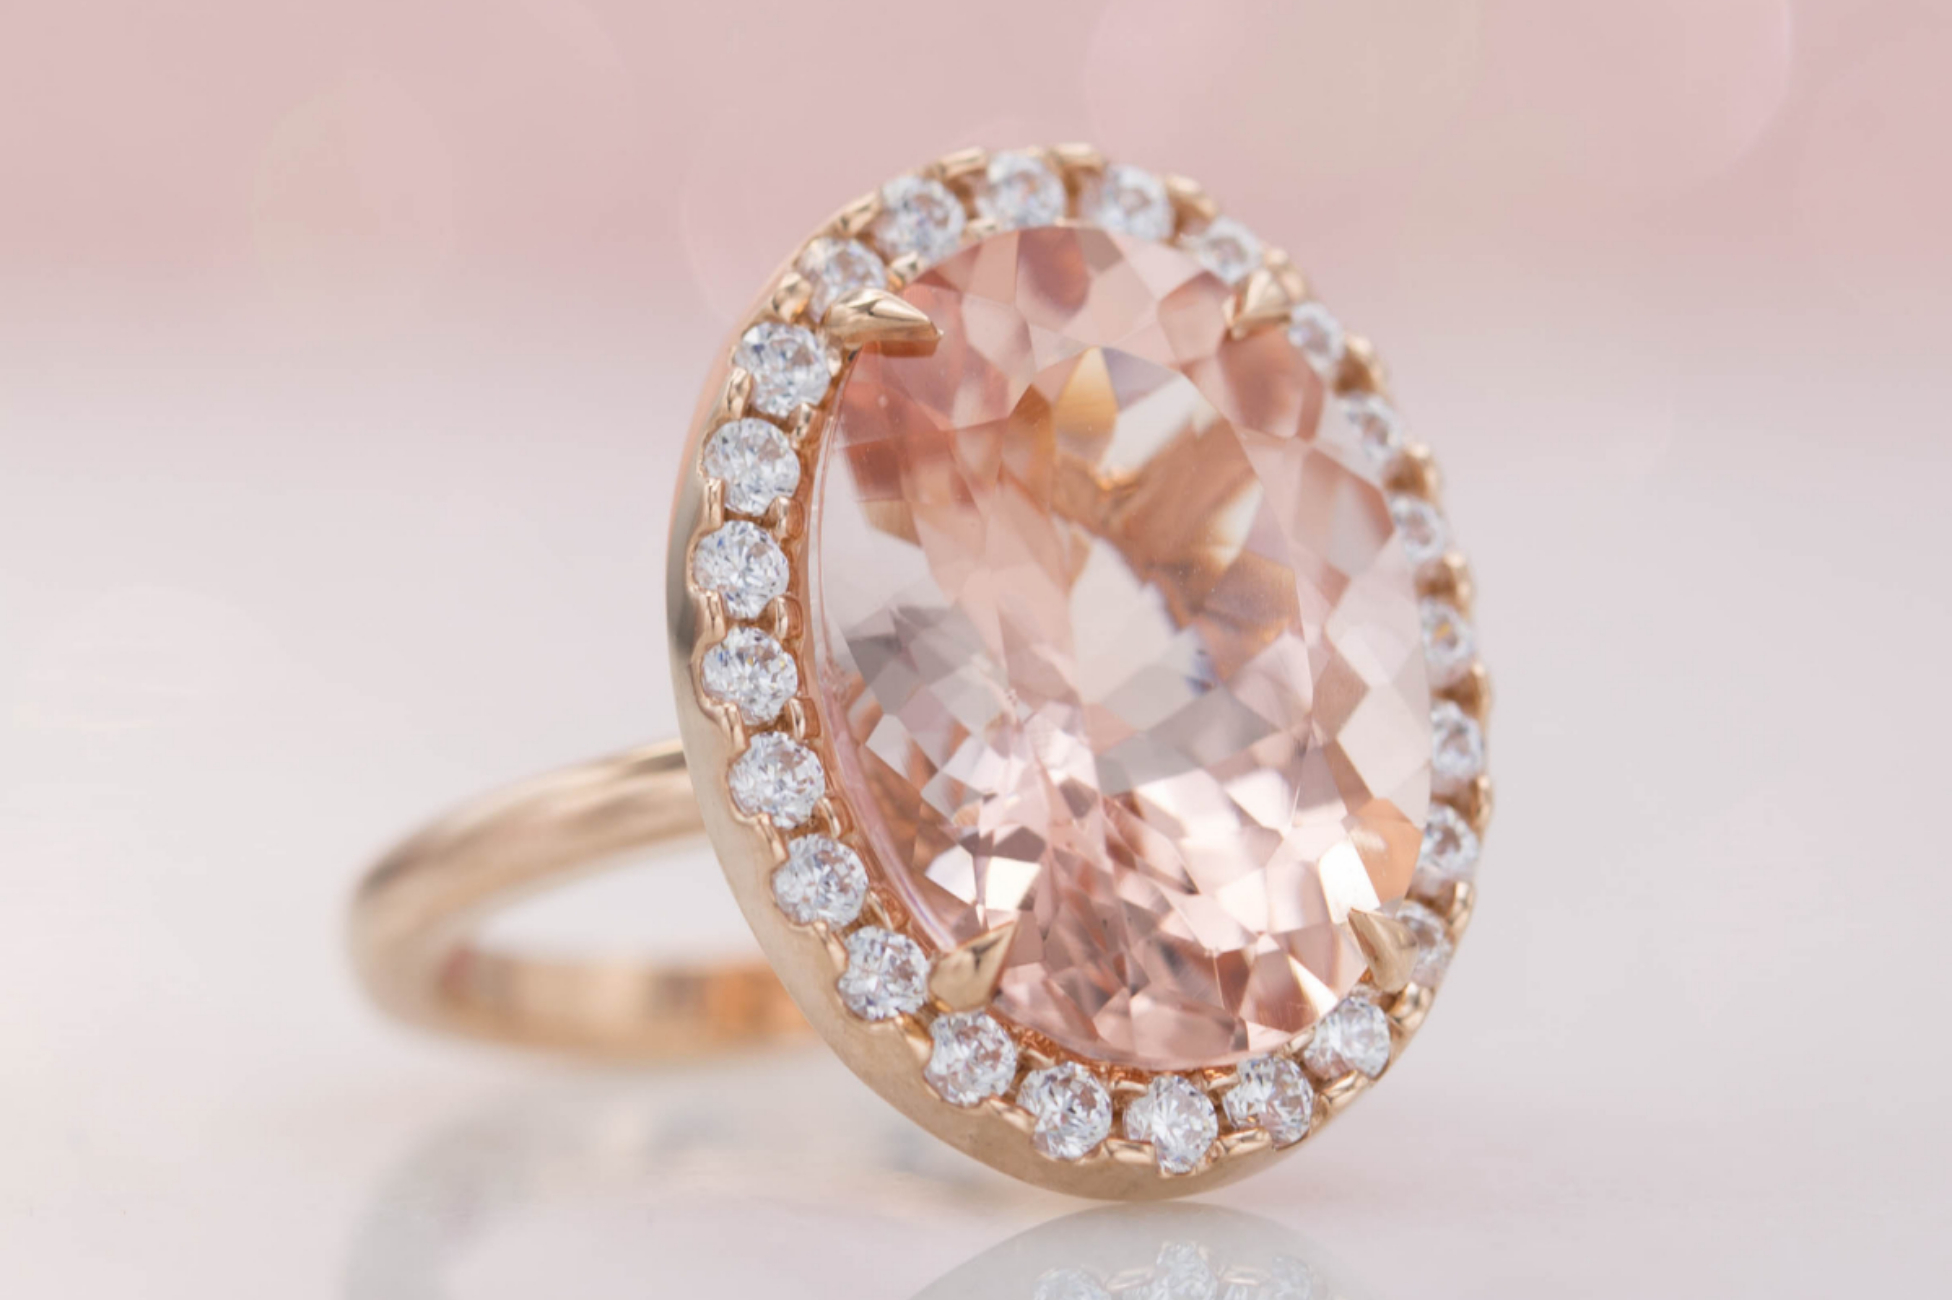 Halo engagement ring with huge oval morganite center stone